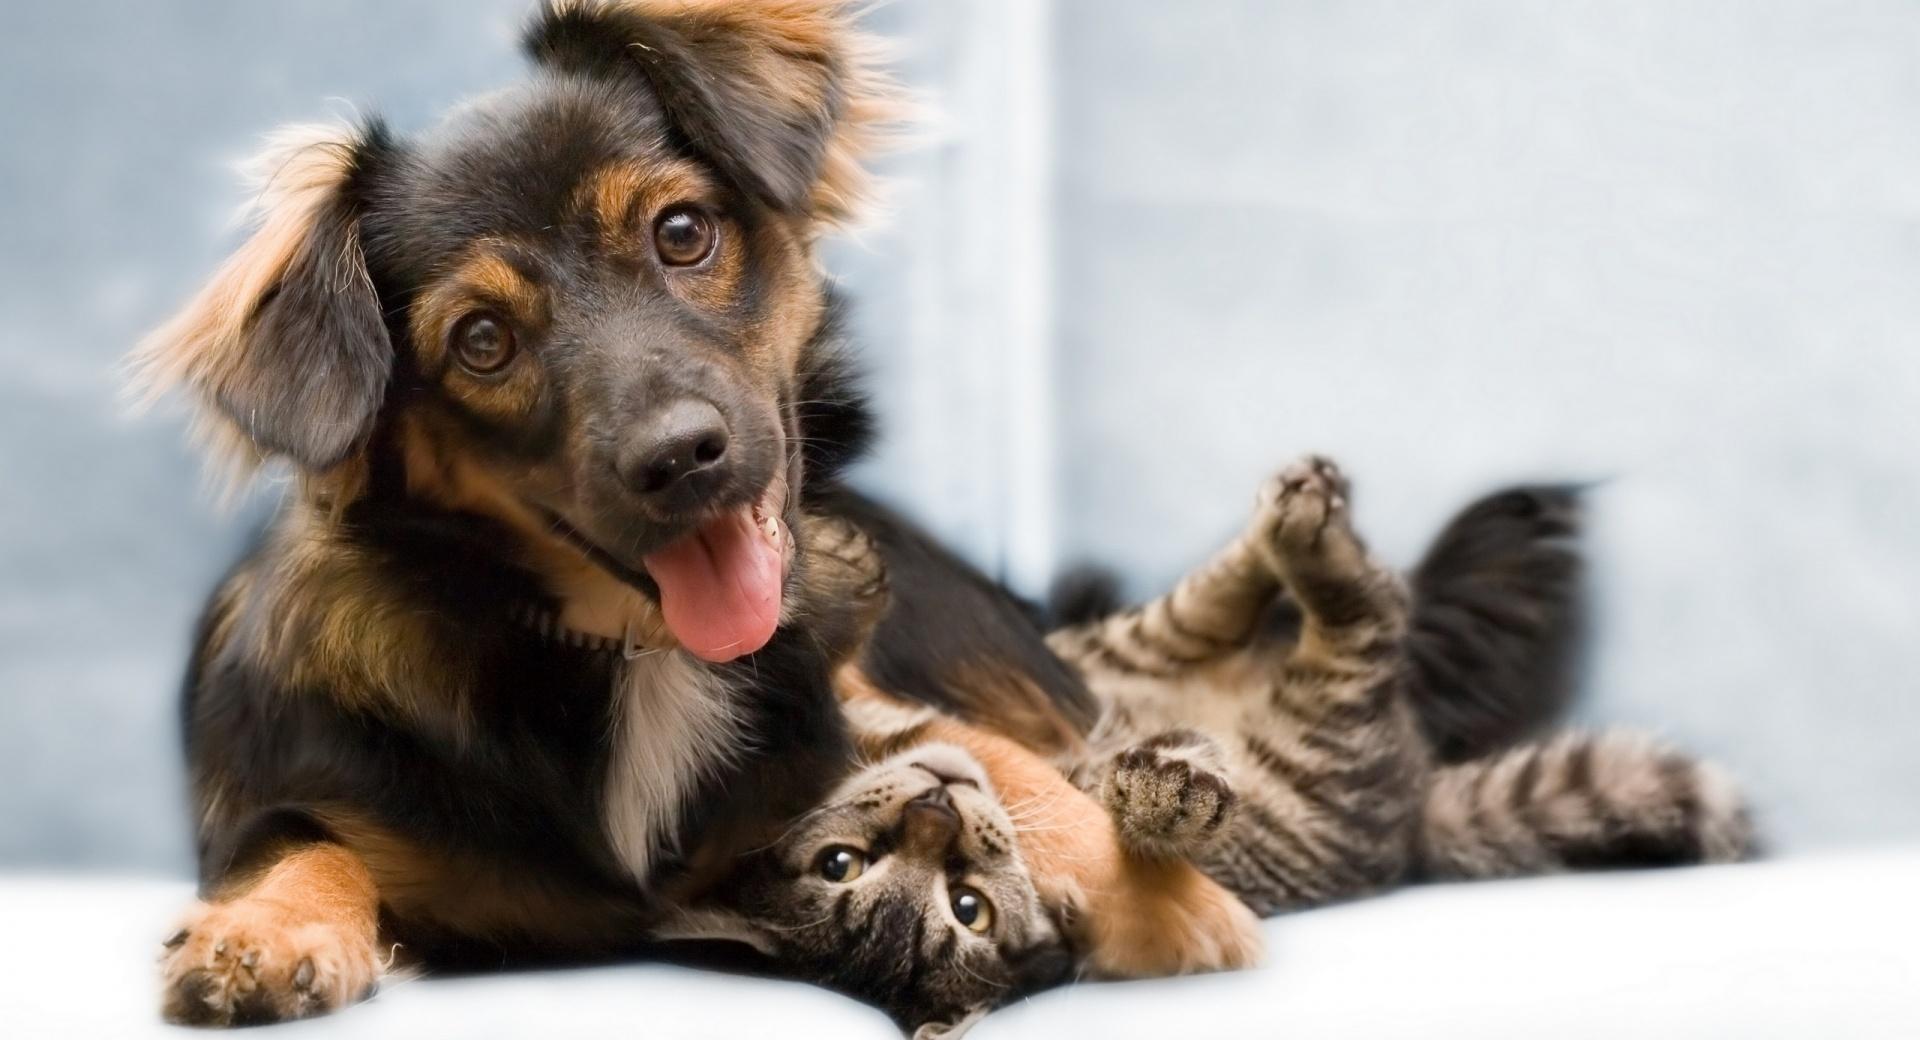 Dog And Cat Friendship wallpapers HD quality